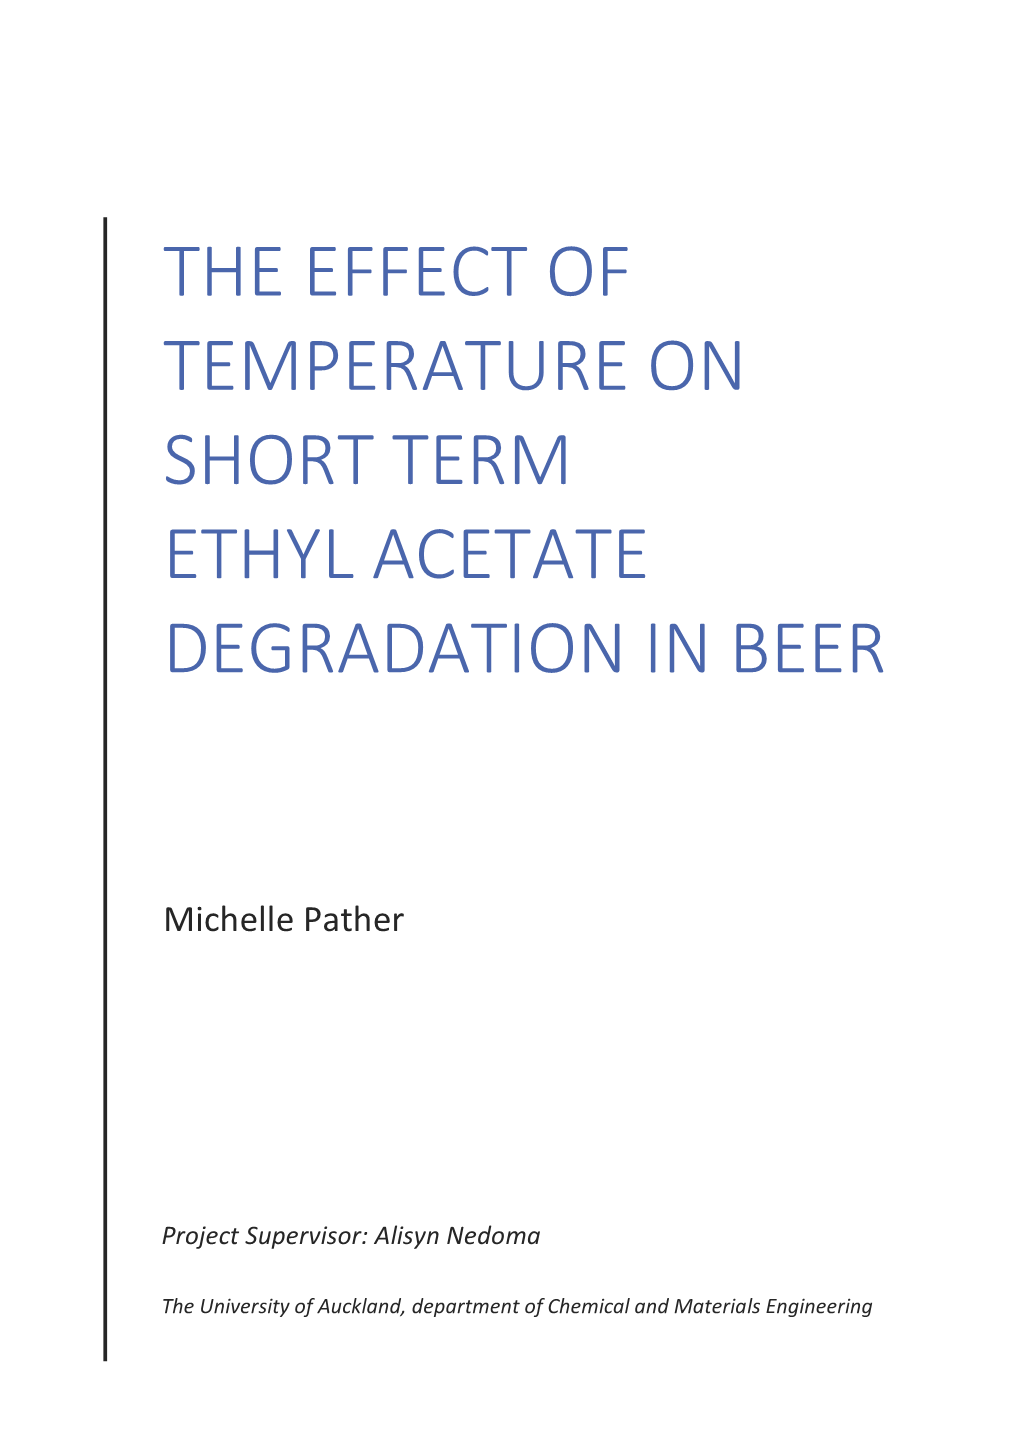 The Effect of Temperature on Short Term Ethyl Acetate Degradation in Beer